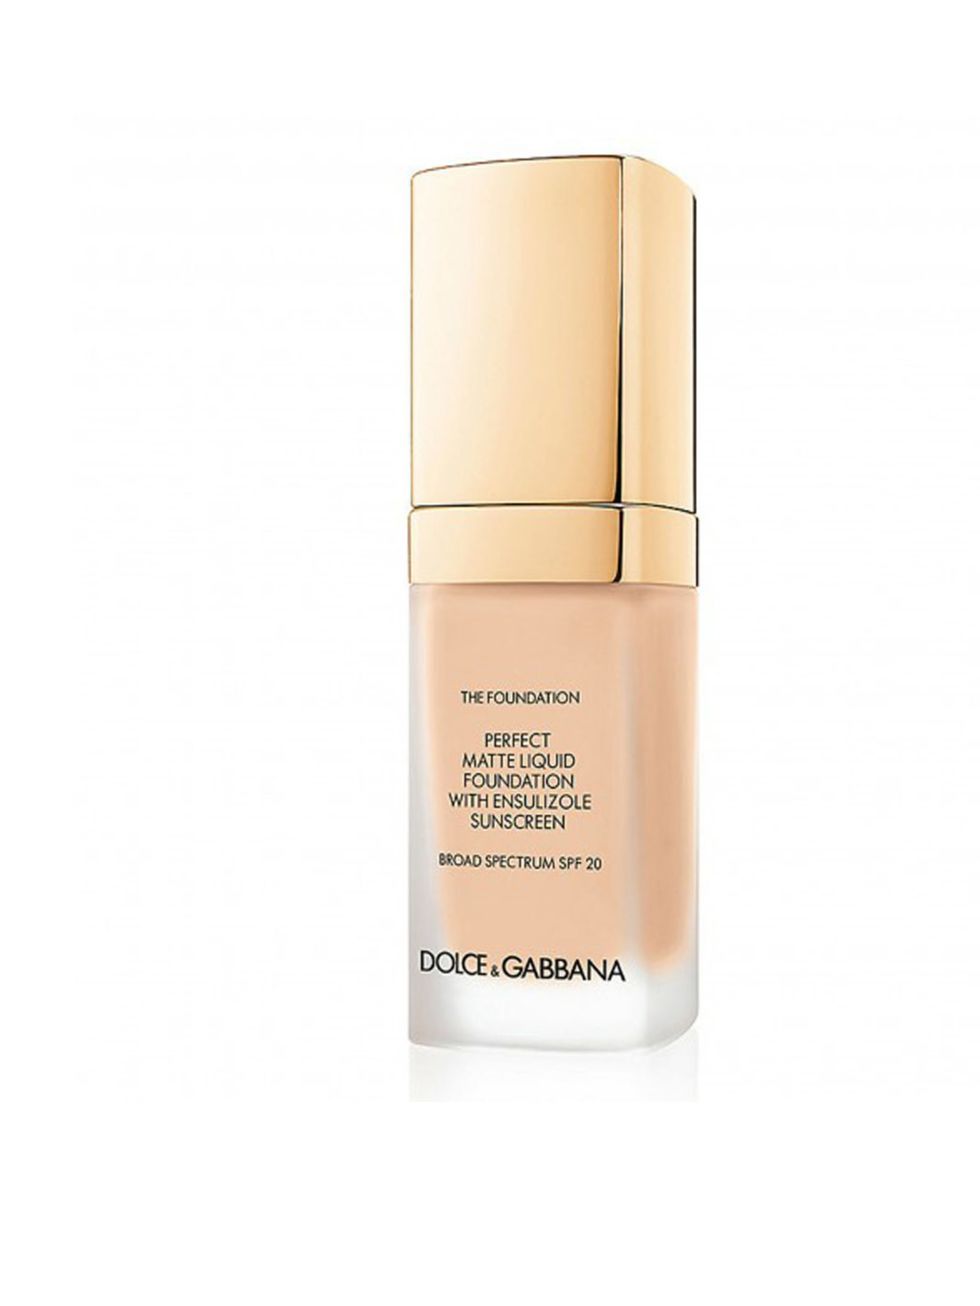 <p><a href="http://www.harrods.com/product/perfect-matte-liquid-foundation/dolce-and-gabbana-makeup/b12-0804-033-DGM-069">Dolce & Gabbana Perfect Matte Liquid Foundation, £38</a></p><p>Get Katys smooth and even complexion with this long-lasting, mattifyi